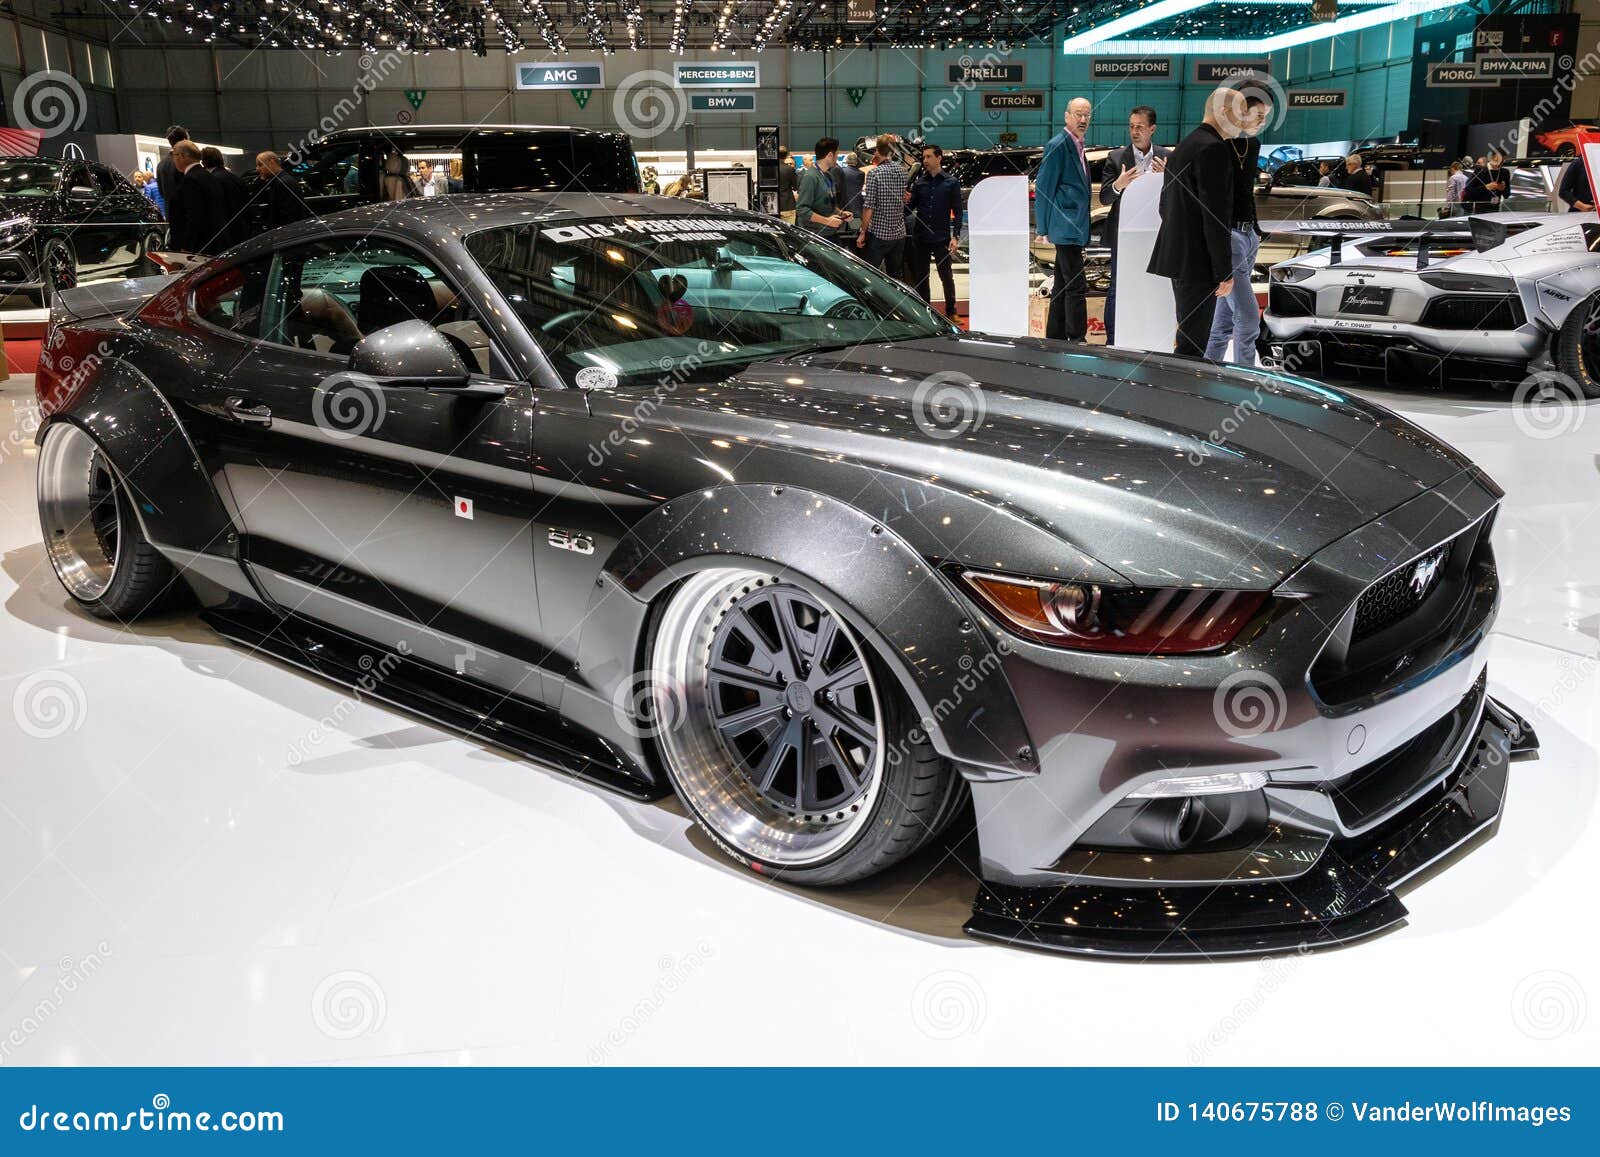 Custom Ford Mustang Sports Car Editorial Stock Photo - Image of showroom: 140675788